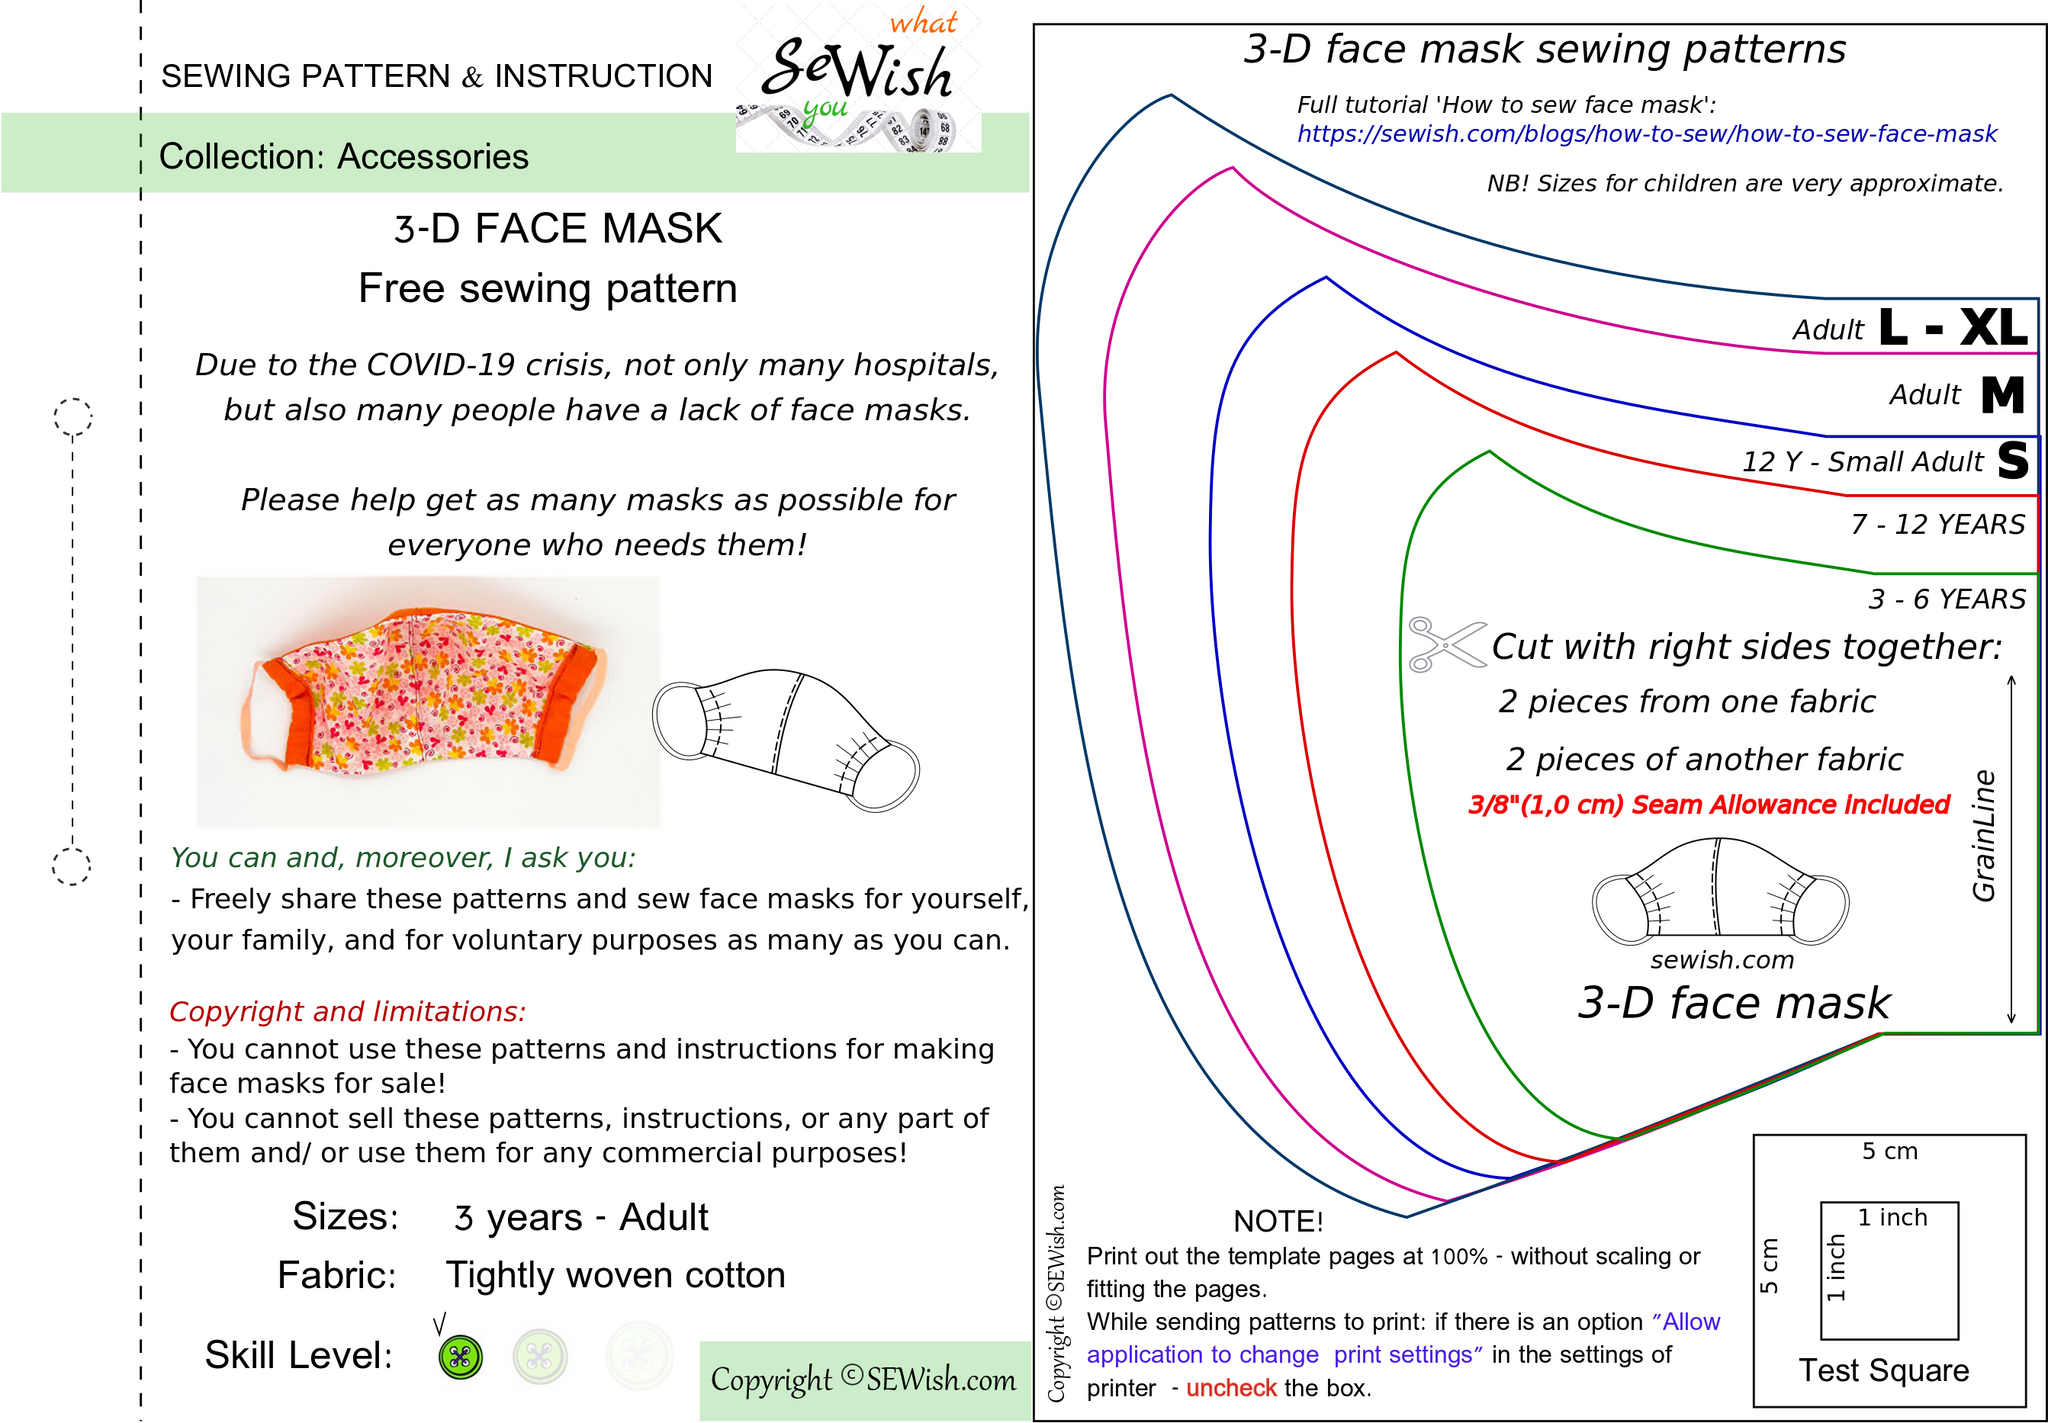 sewing-pattern-for-face-mask-completely-free-sewing-pattern-sewish